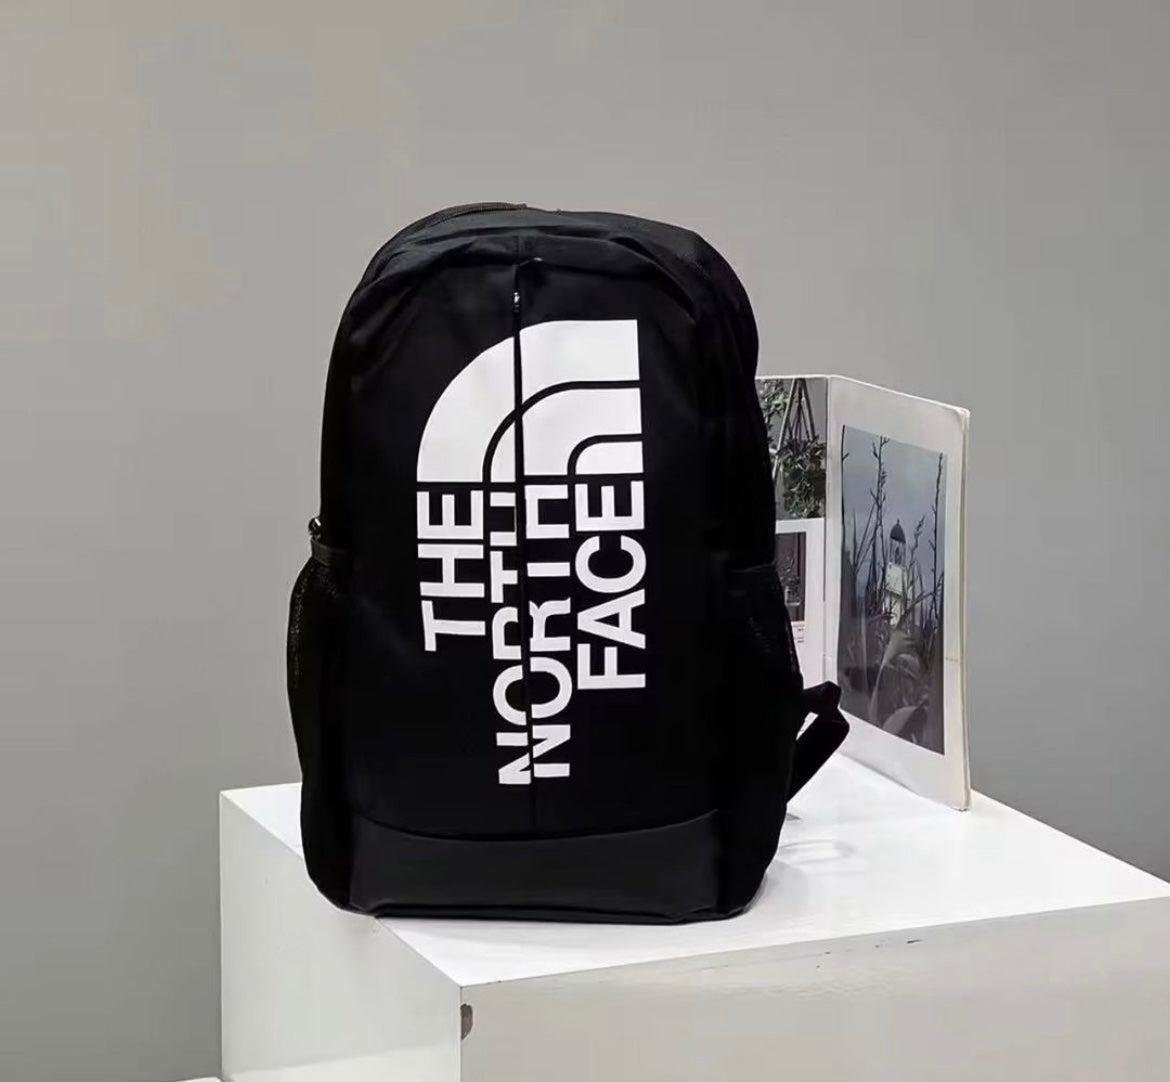 The northface backpack